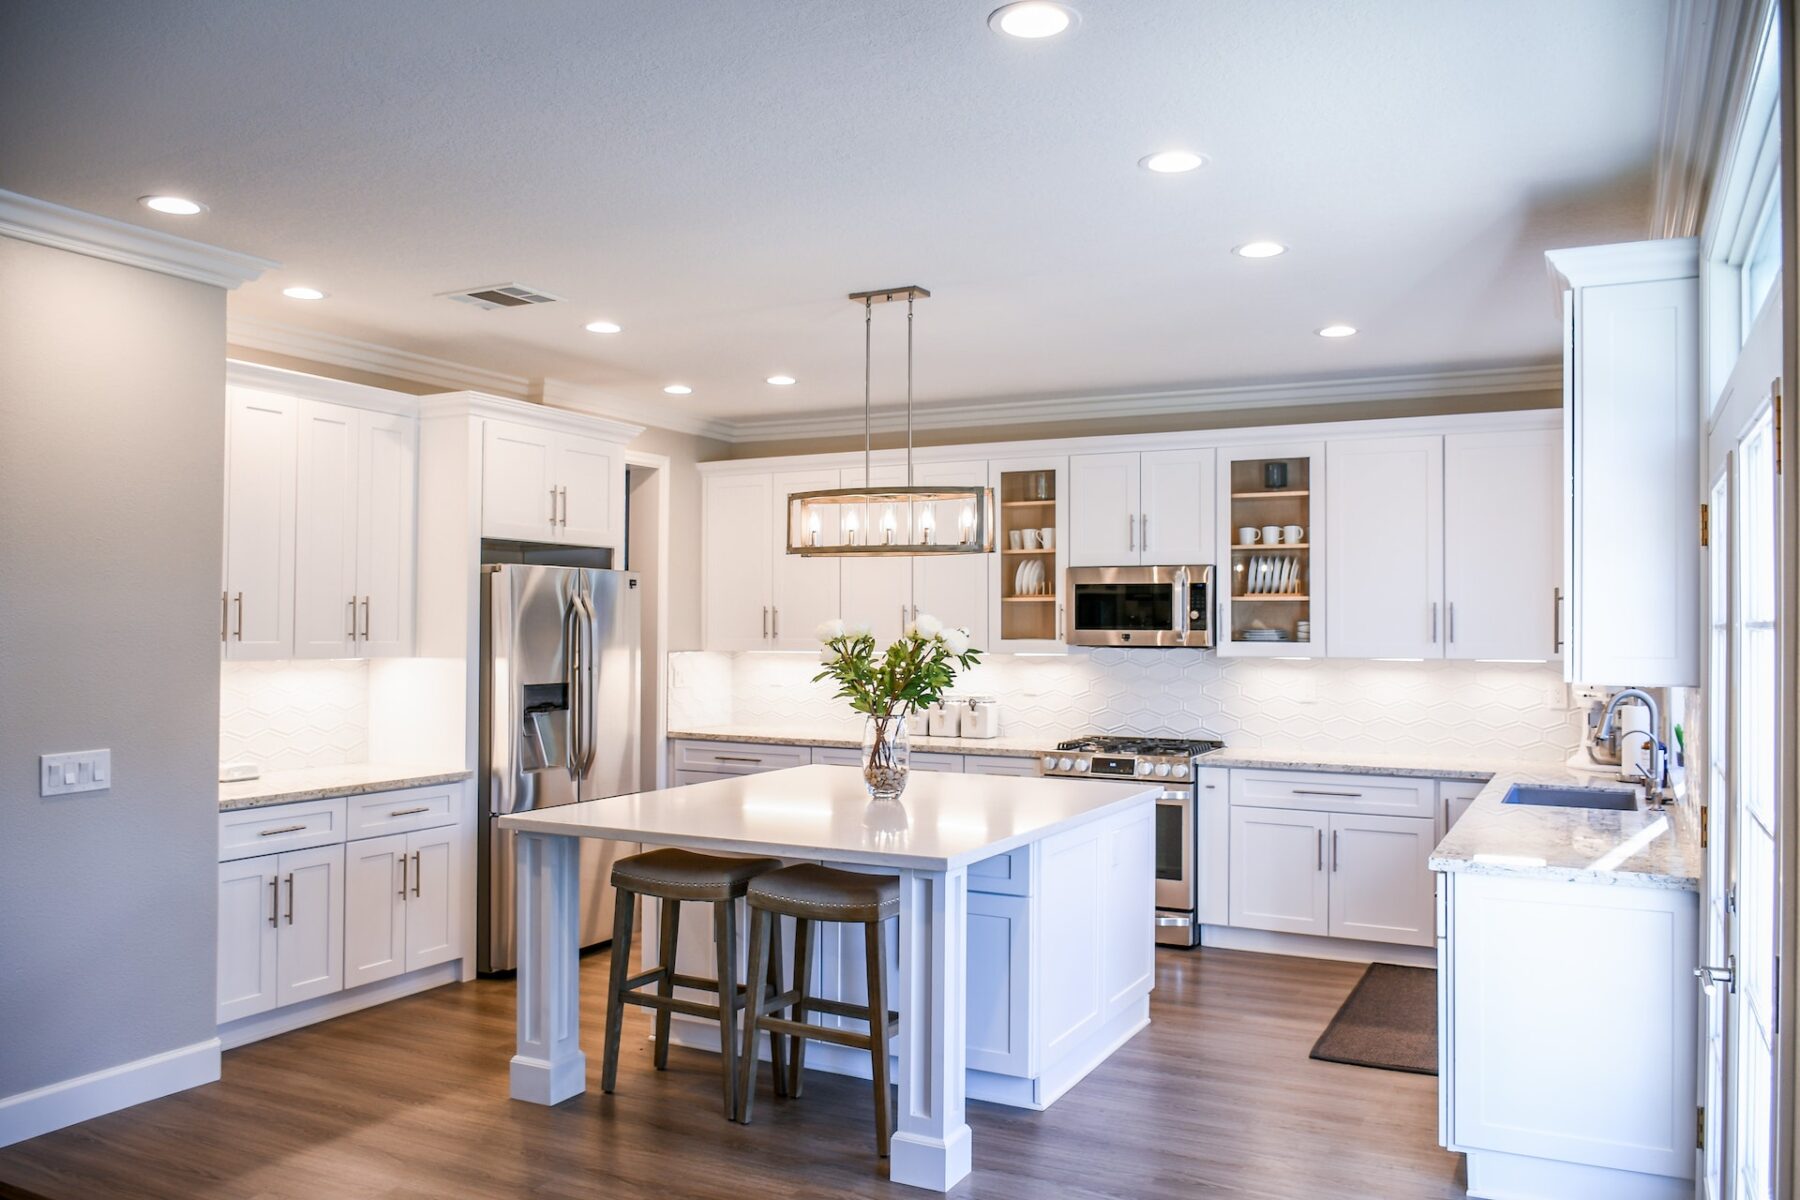 Refresh Area: How To Choose The Right Contractor For Your Kitchen Remodel